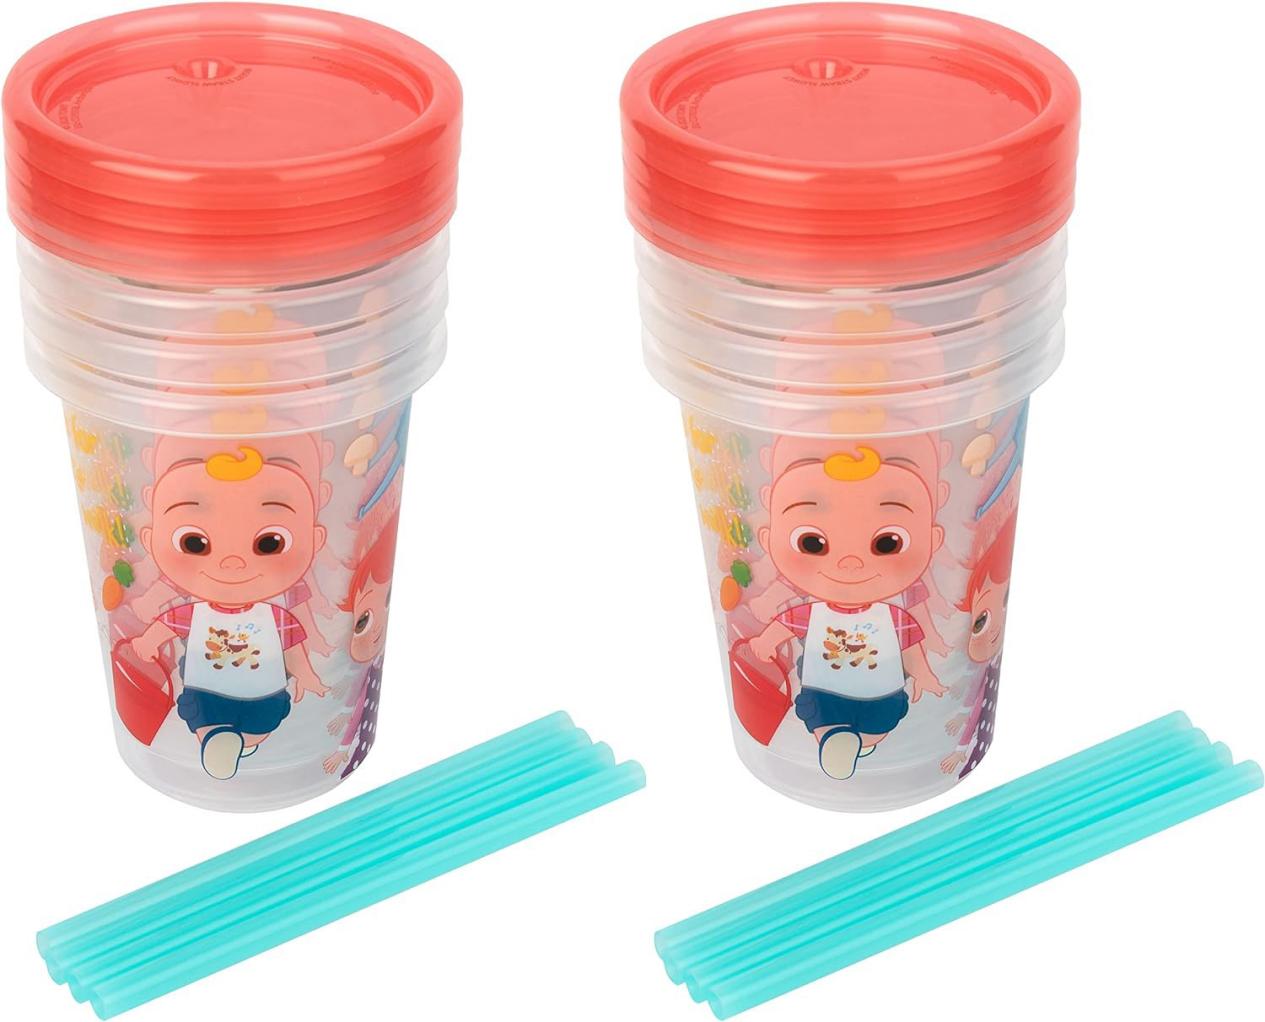 New Product-Children's Straw Cup!